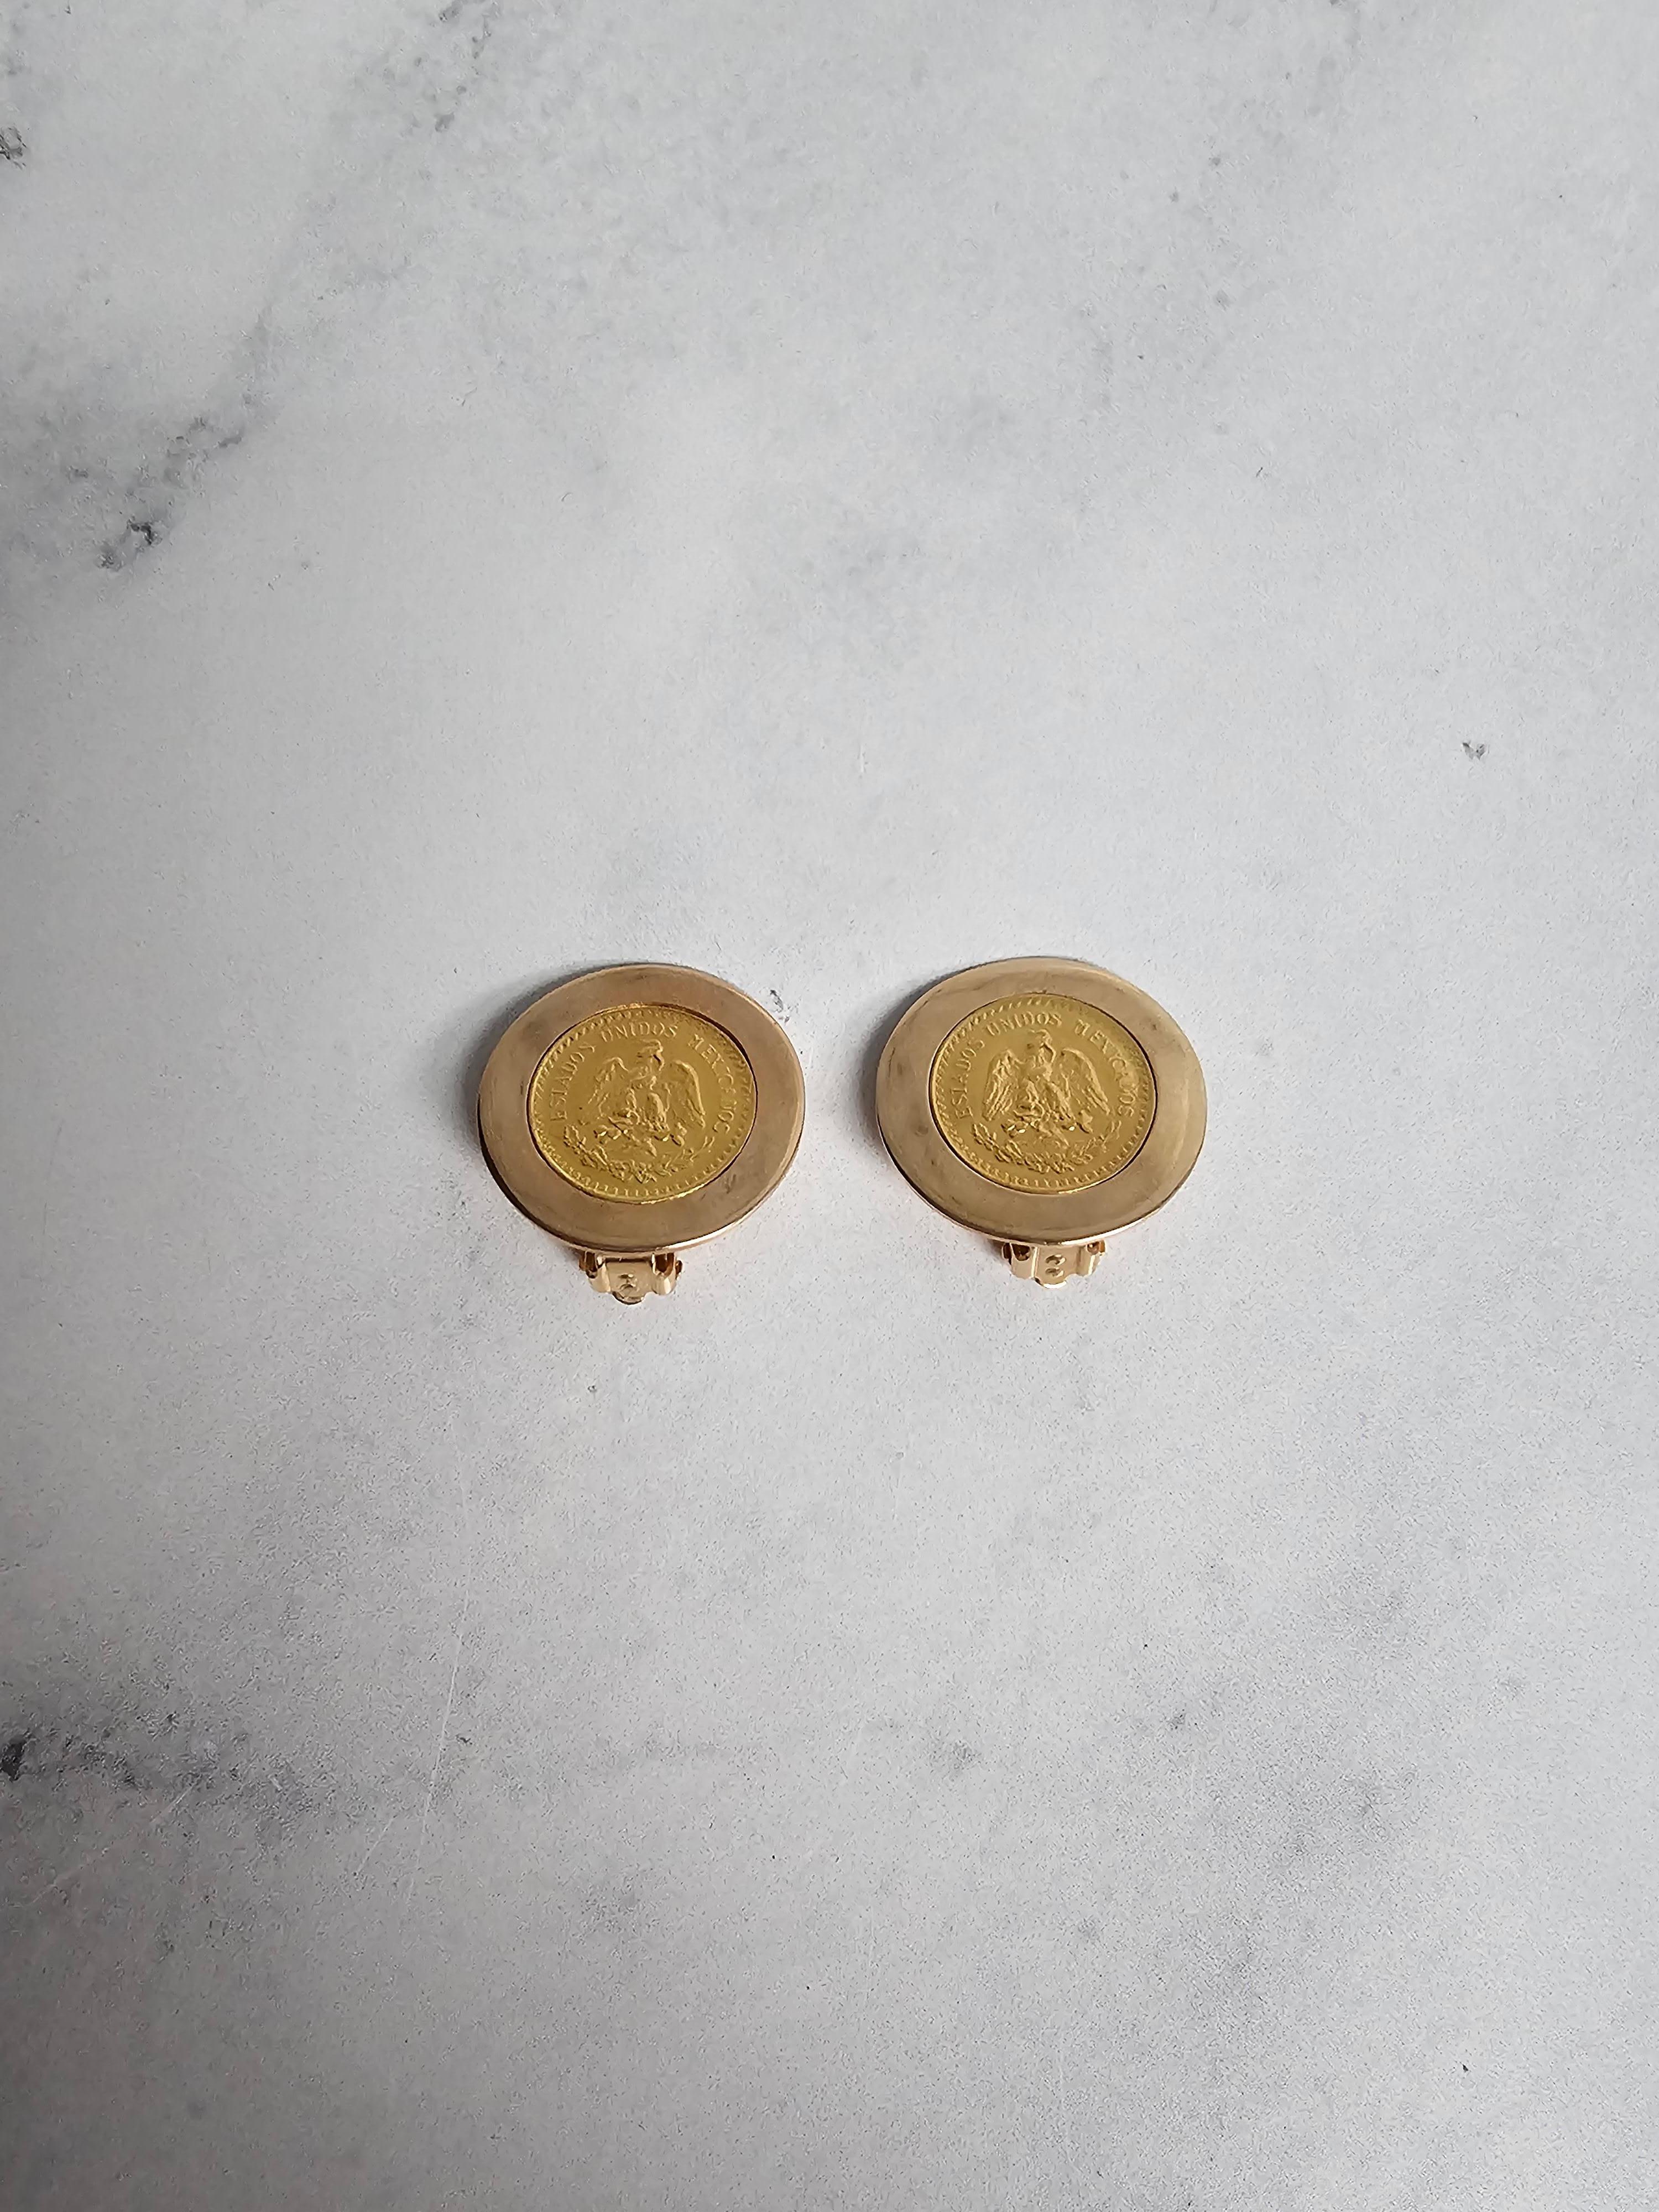 1945 Dos Y Medio Coin Clip On Earrings with Polished Bezel Frame 14k Yellow Gold For Sale 1